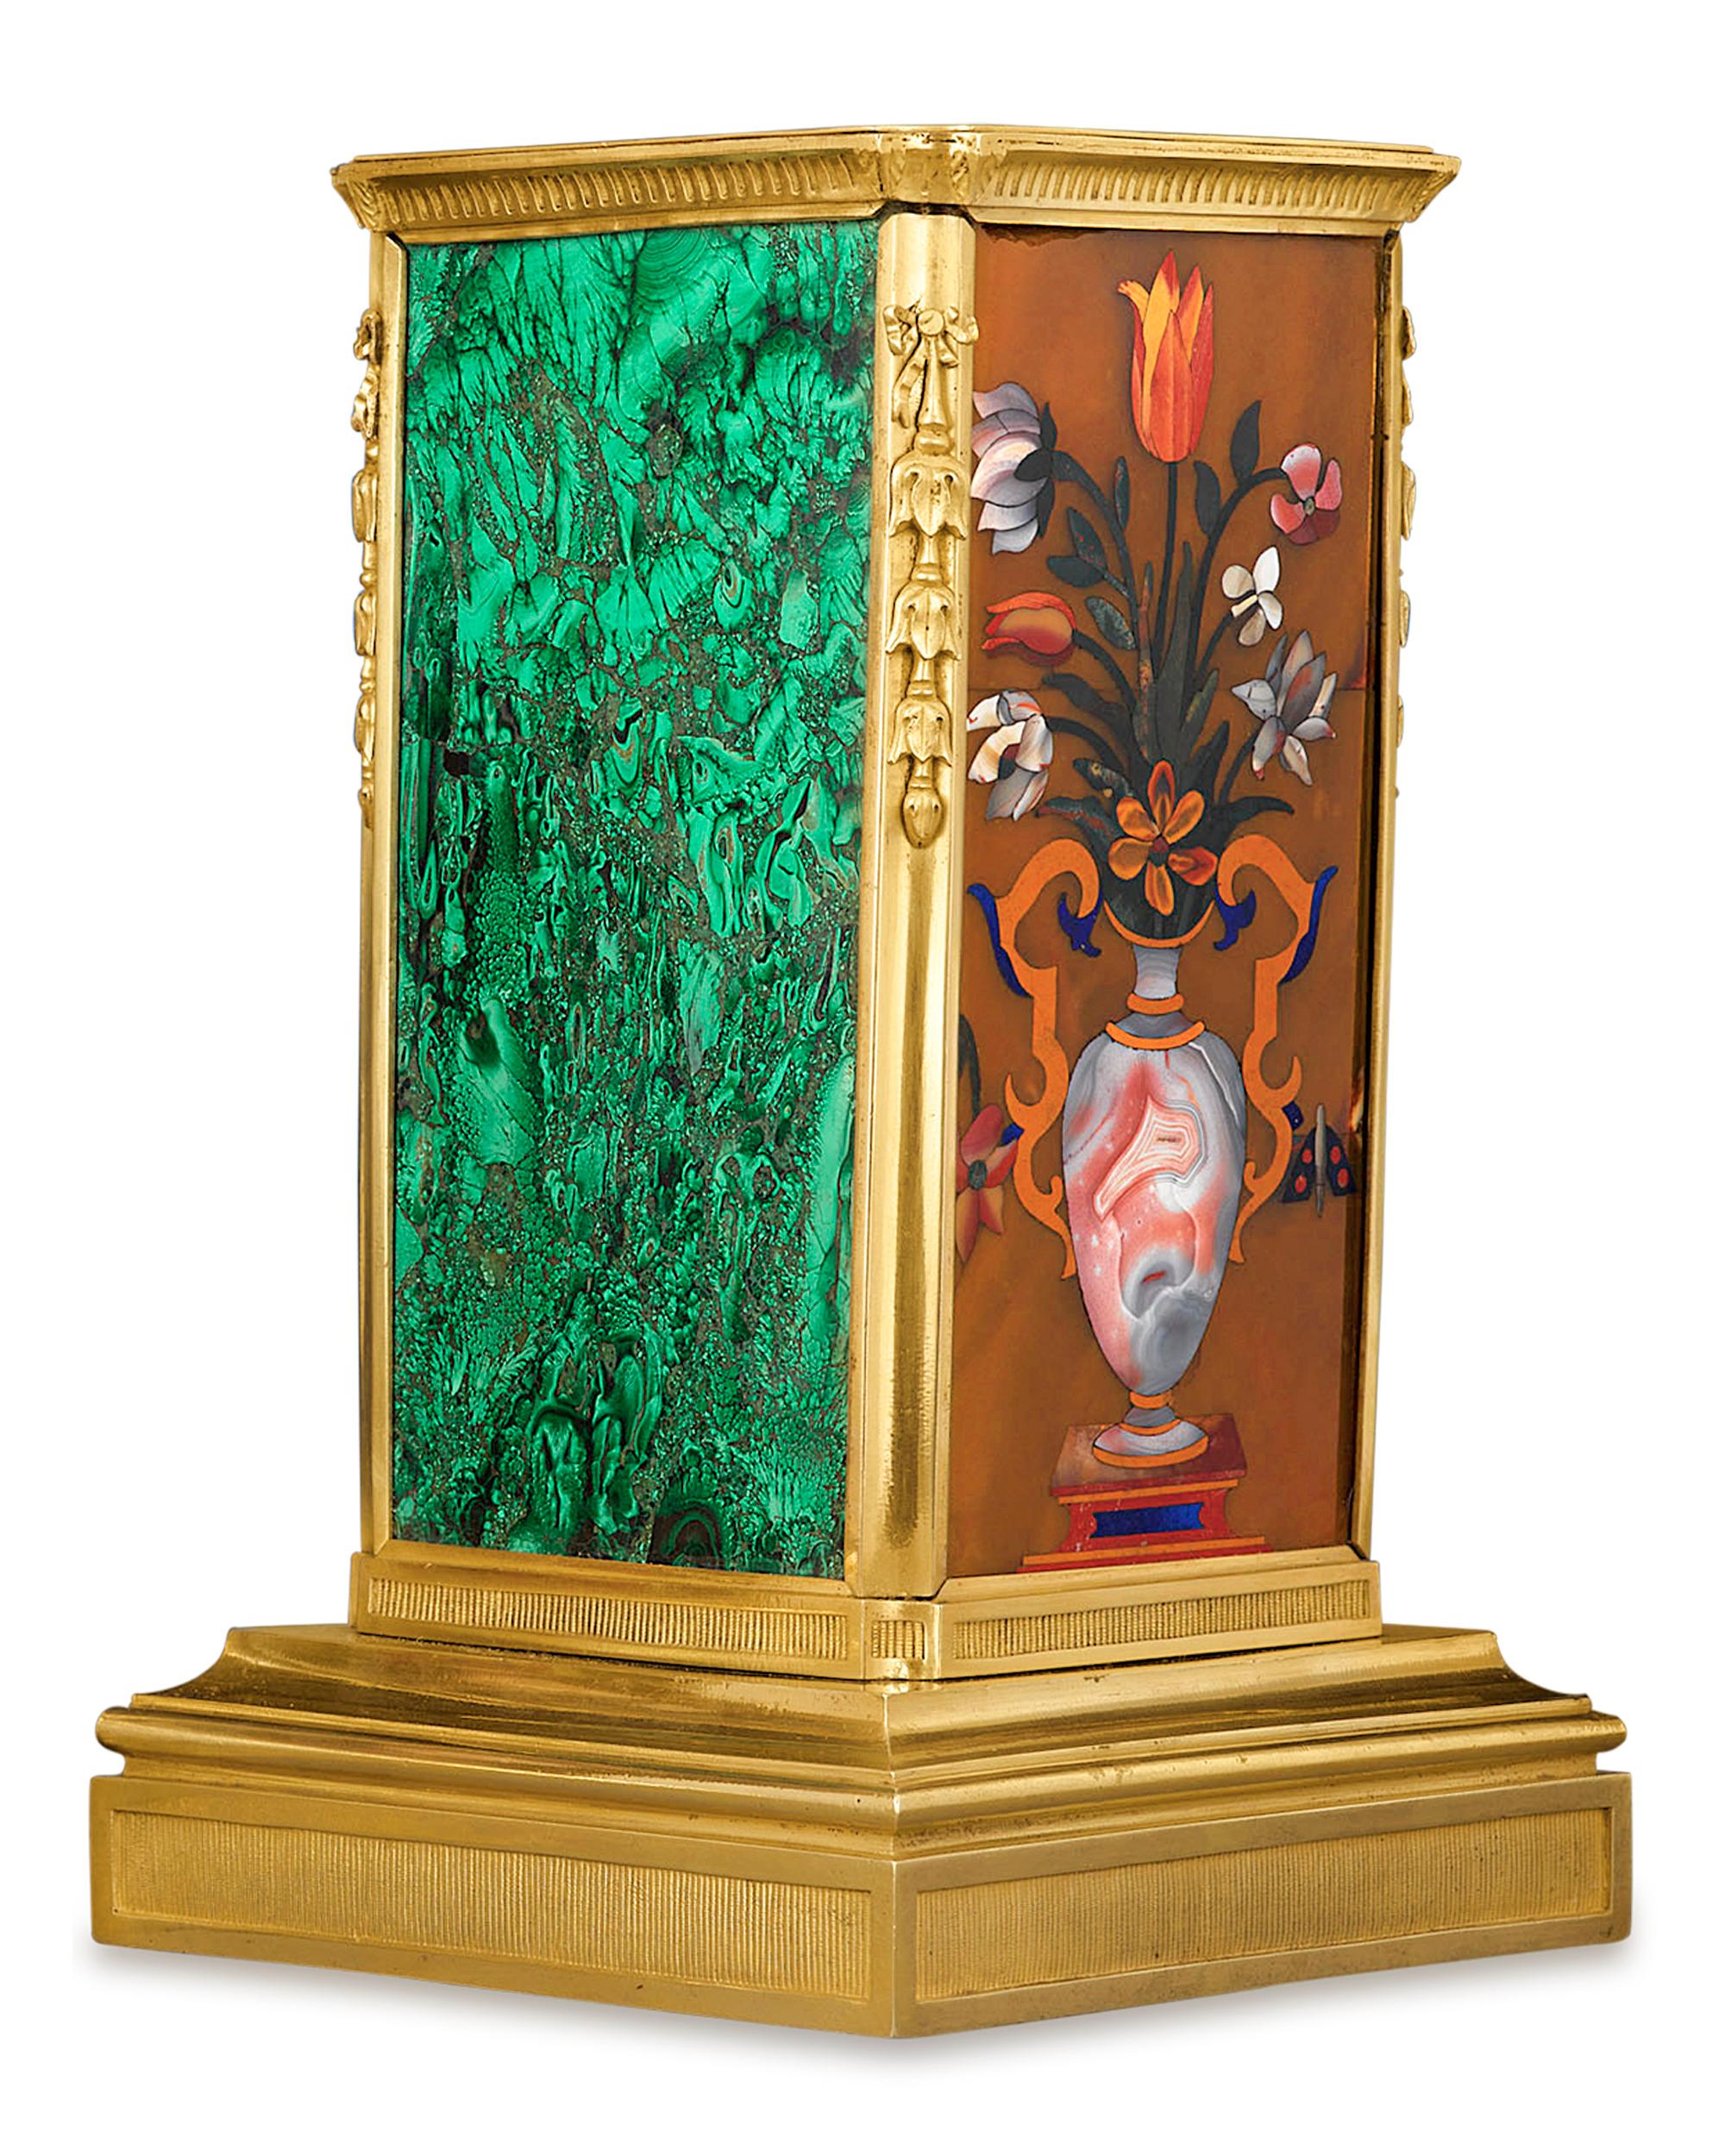 The exquisite art of pietre dure is at its absolute finest in this spectacular pair of Russian ormolu and malachite plinths. True works of art of the Restauration period, these plinths each feature a matching pietre dure mosaic crafted of the finest